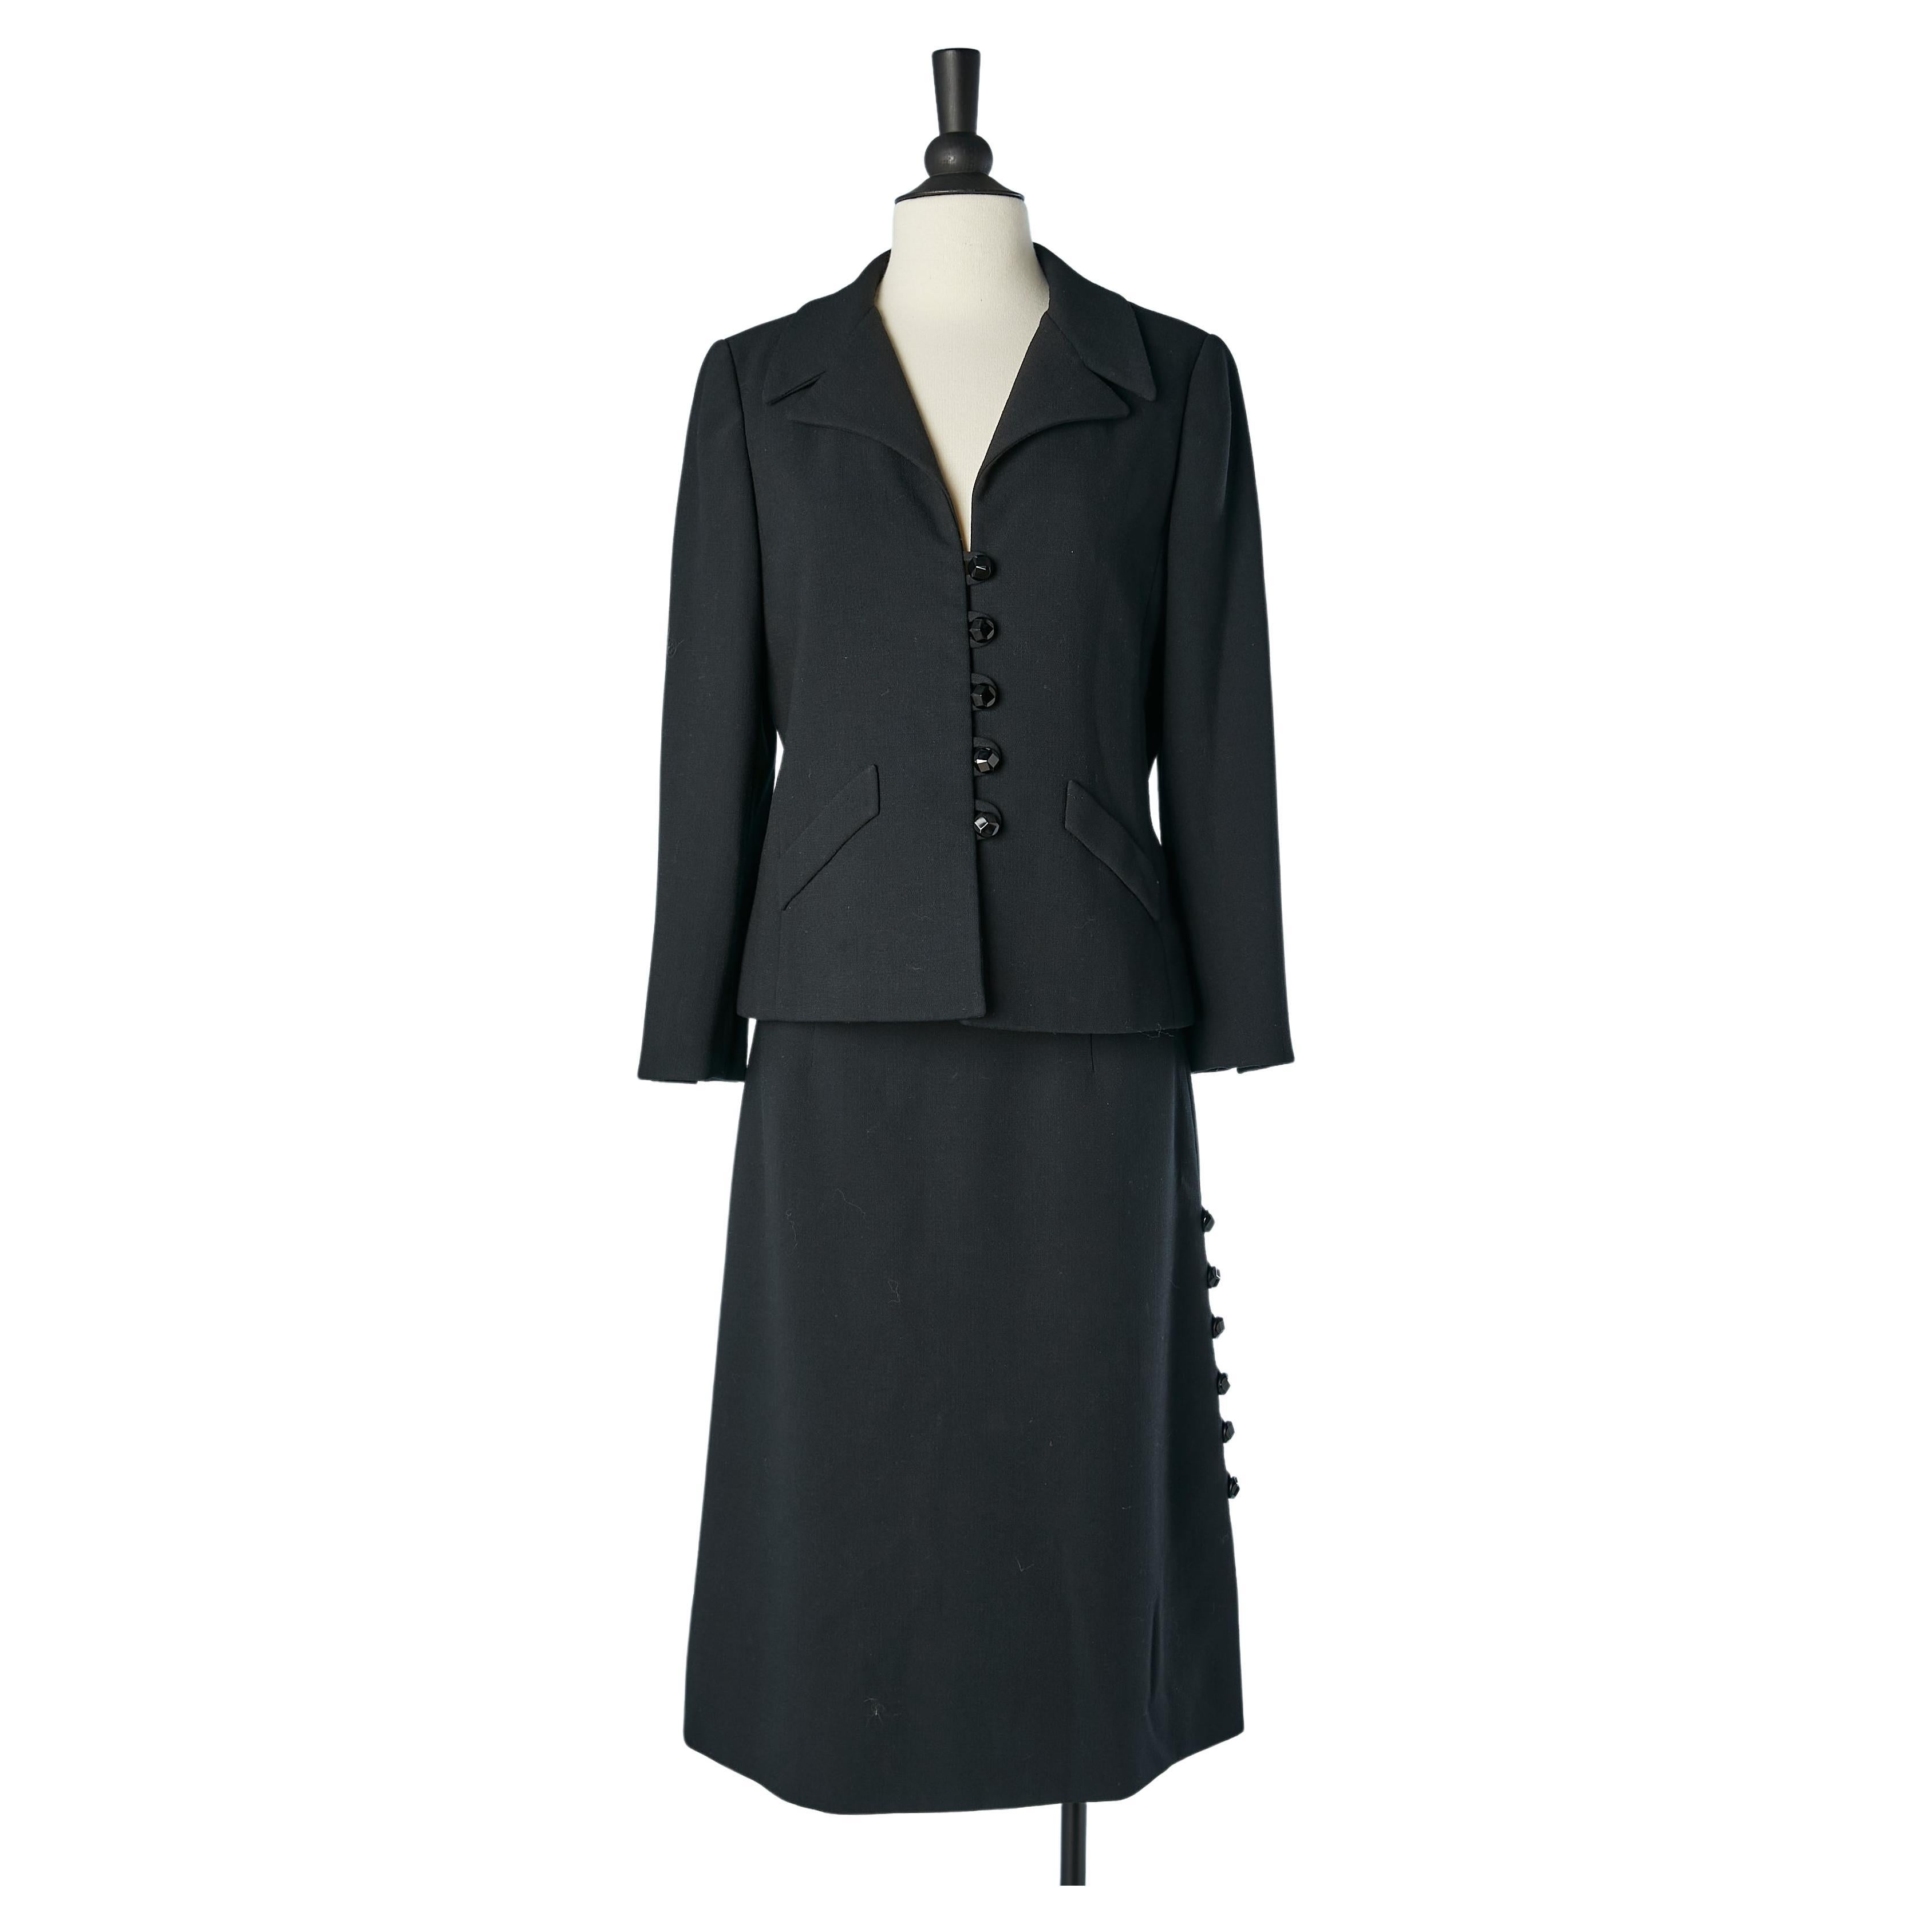 Black wool crêpe skit-suit with black buttons Christian Dior New-York Circa 1950 For Sale